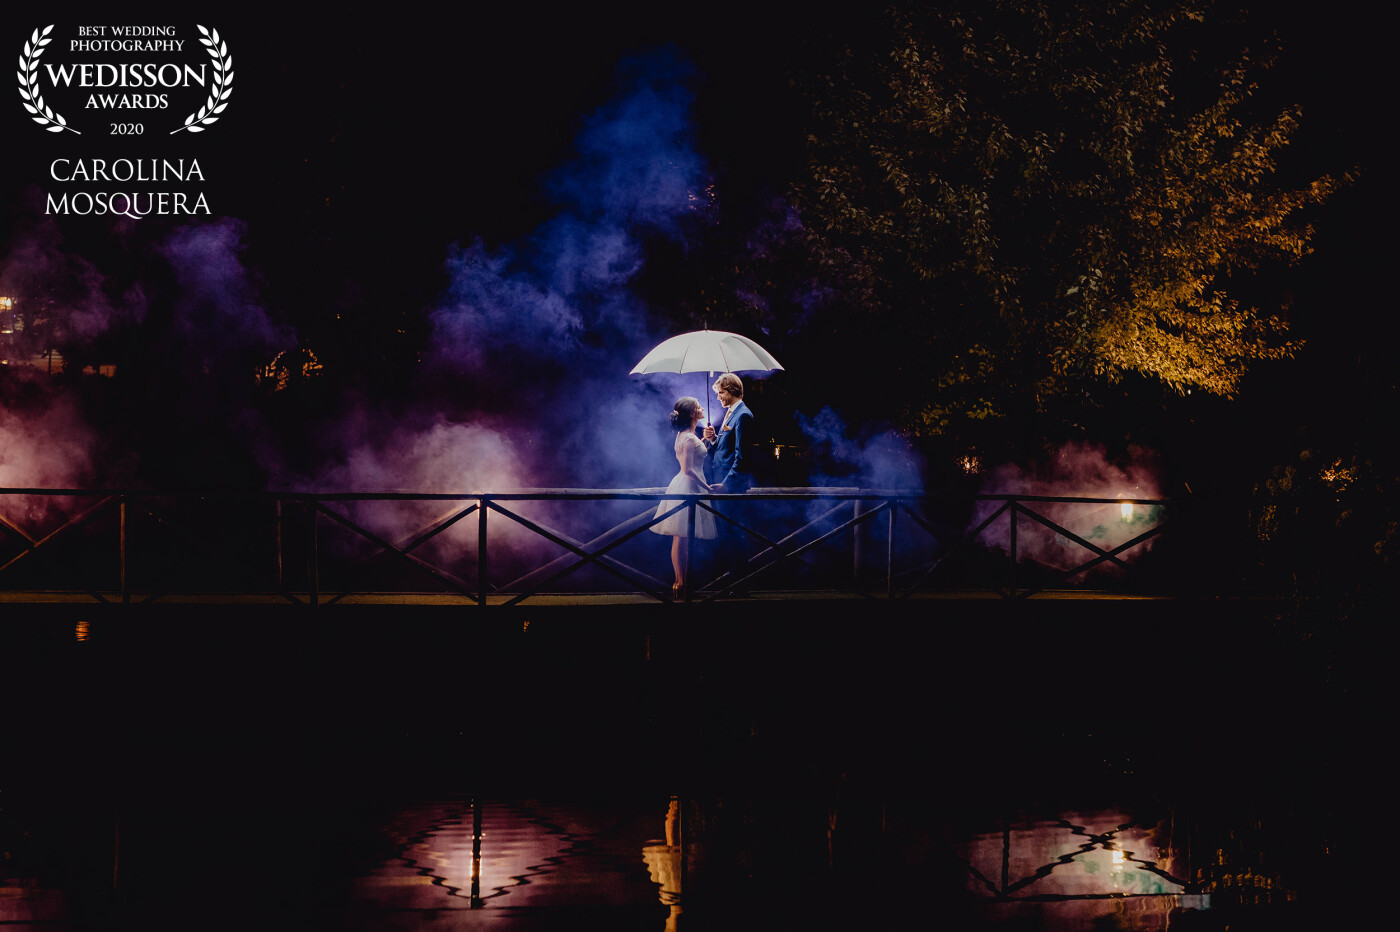 The couple Soetkin and Wim had a beautiful wedding day last year...The bridge was perfect to experiment with smoke bombs and backlights... 